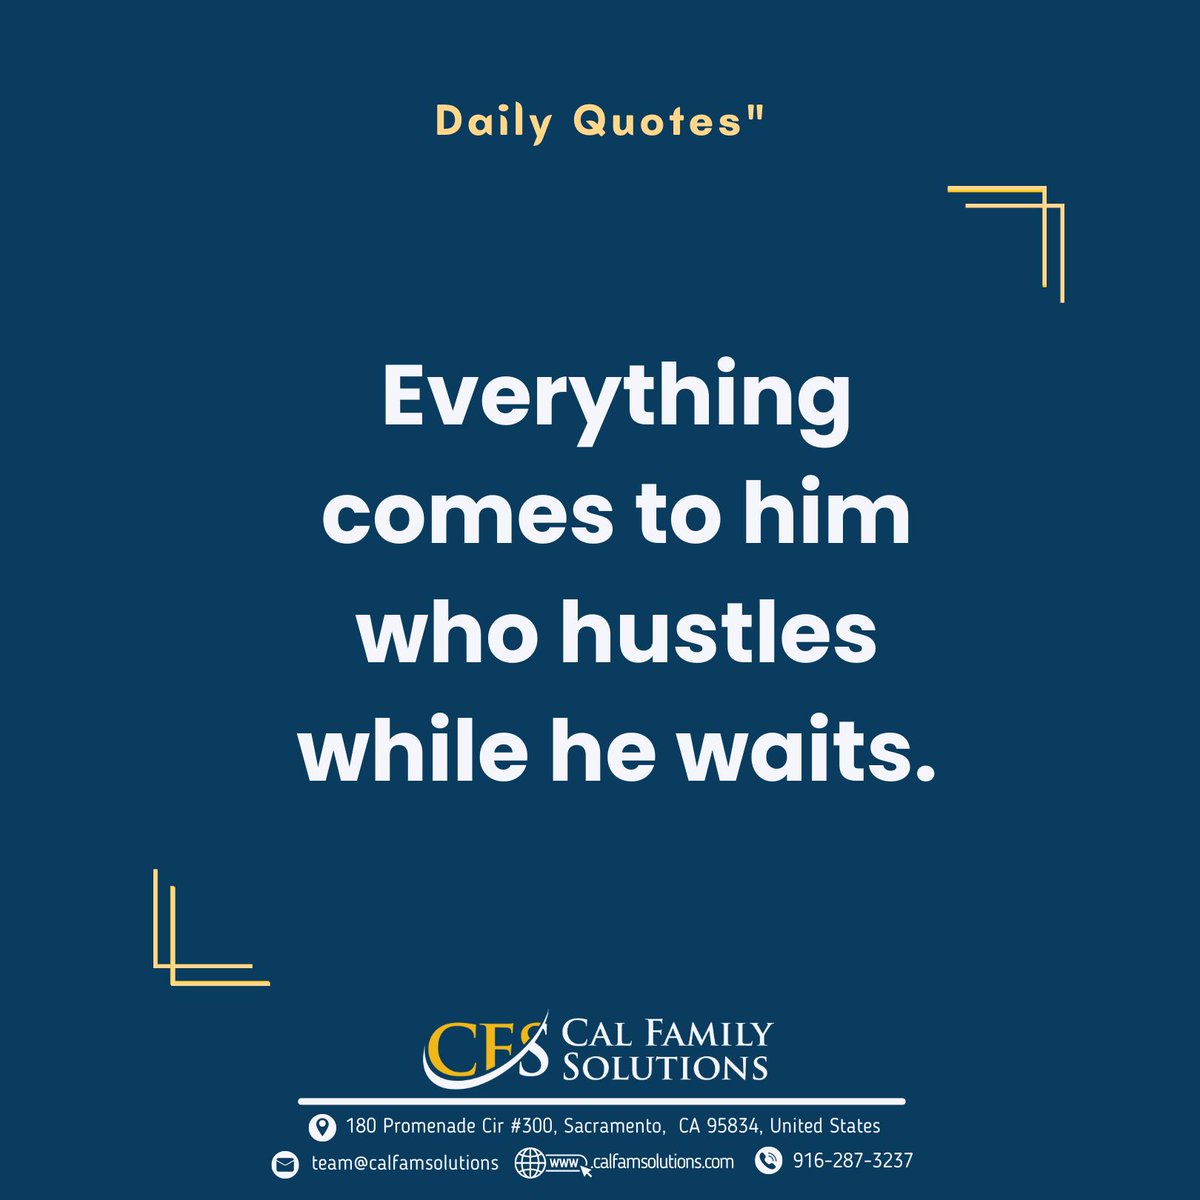 “Everything comes to him who hustles while he waits.” ⏳💪✨🏆
#HustleAndGrind #PatiencePaysoff #Determination #HardWorkPaysOff #AchieveGreatness #lifeafterdivorce #divorcesupport #divorcerecovery #divorcecoach #relationship #woman #Dailyquote #instaquote #momlife #familylaw